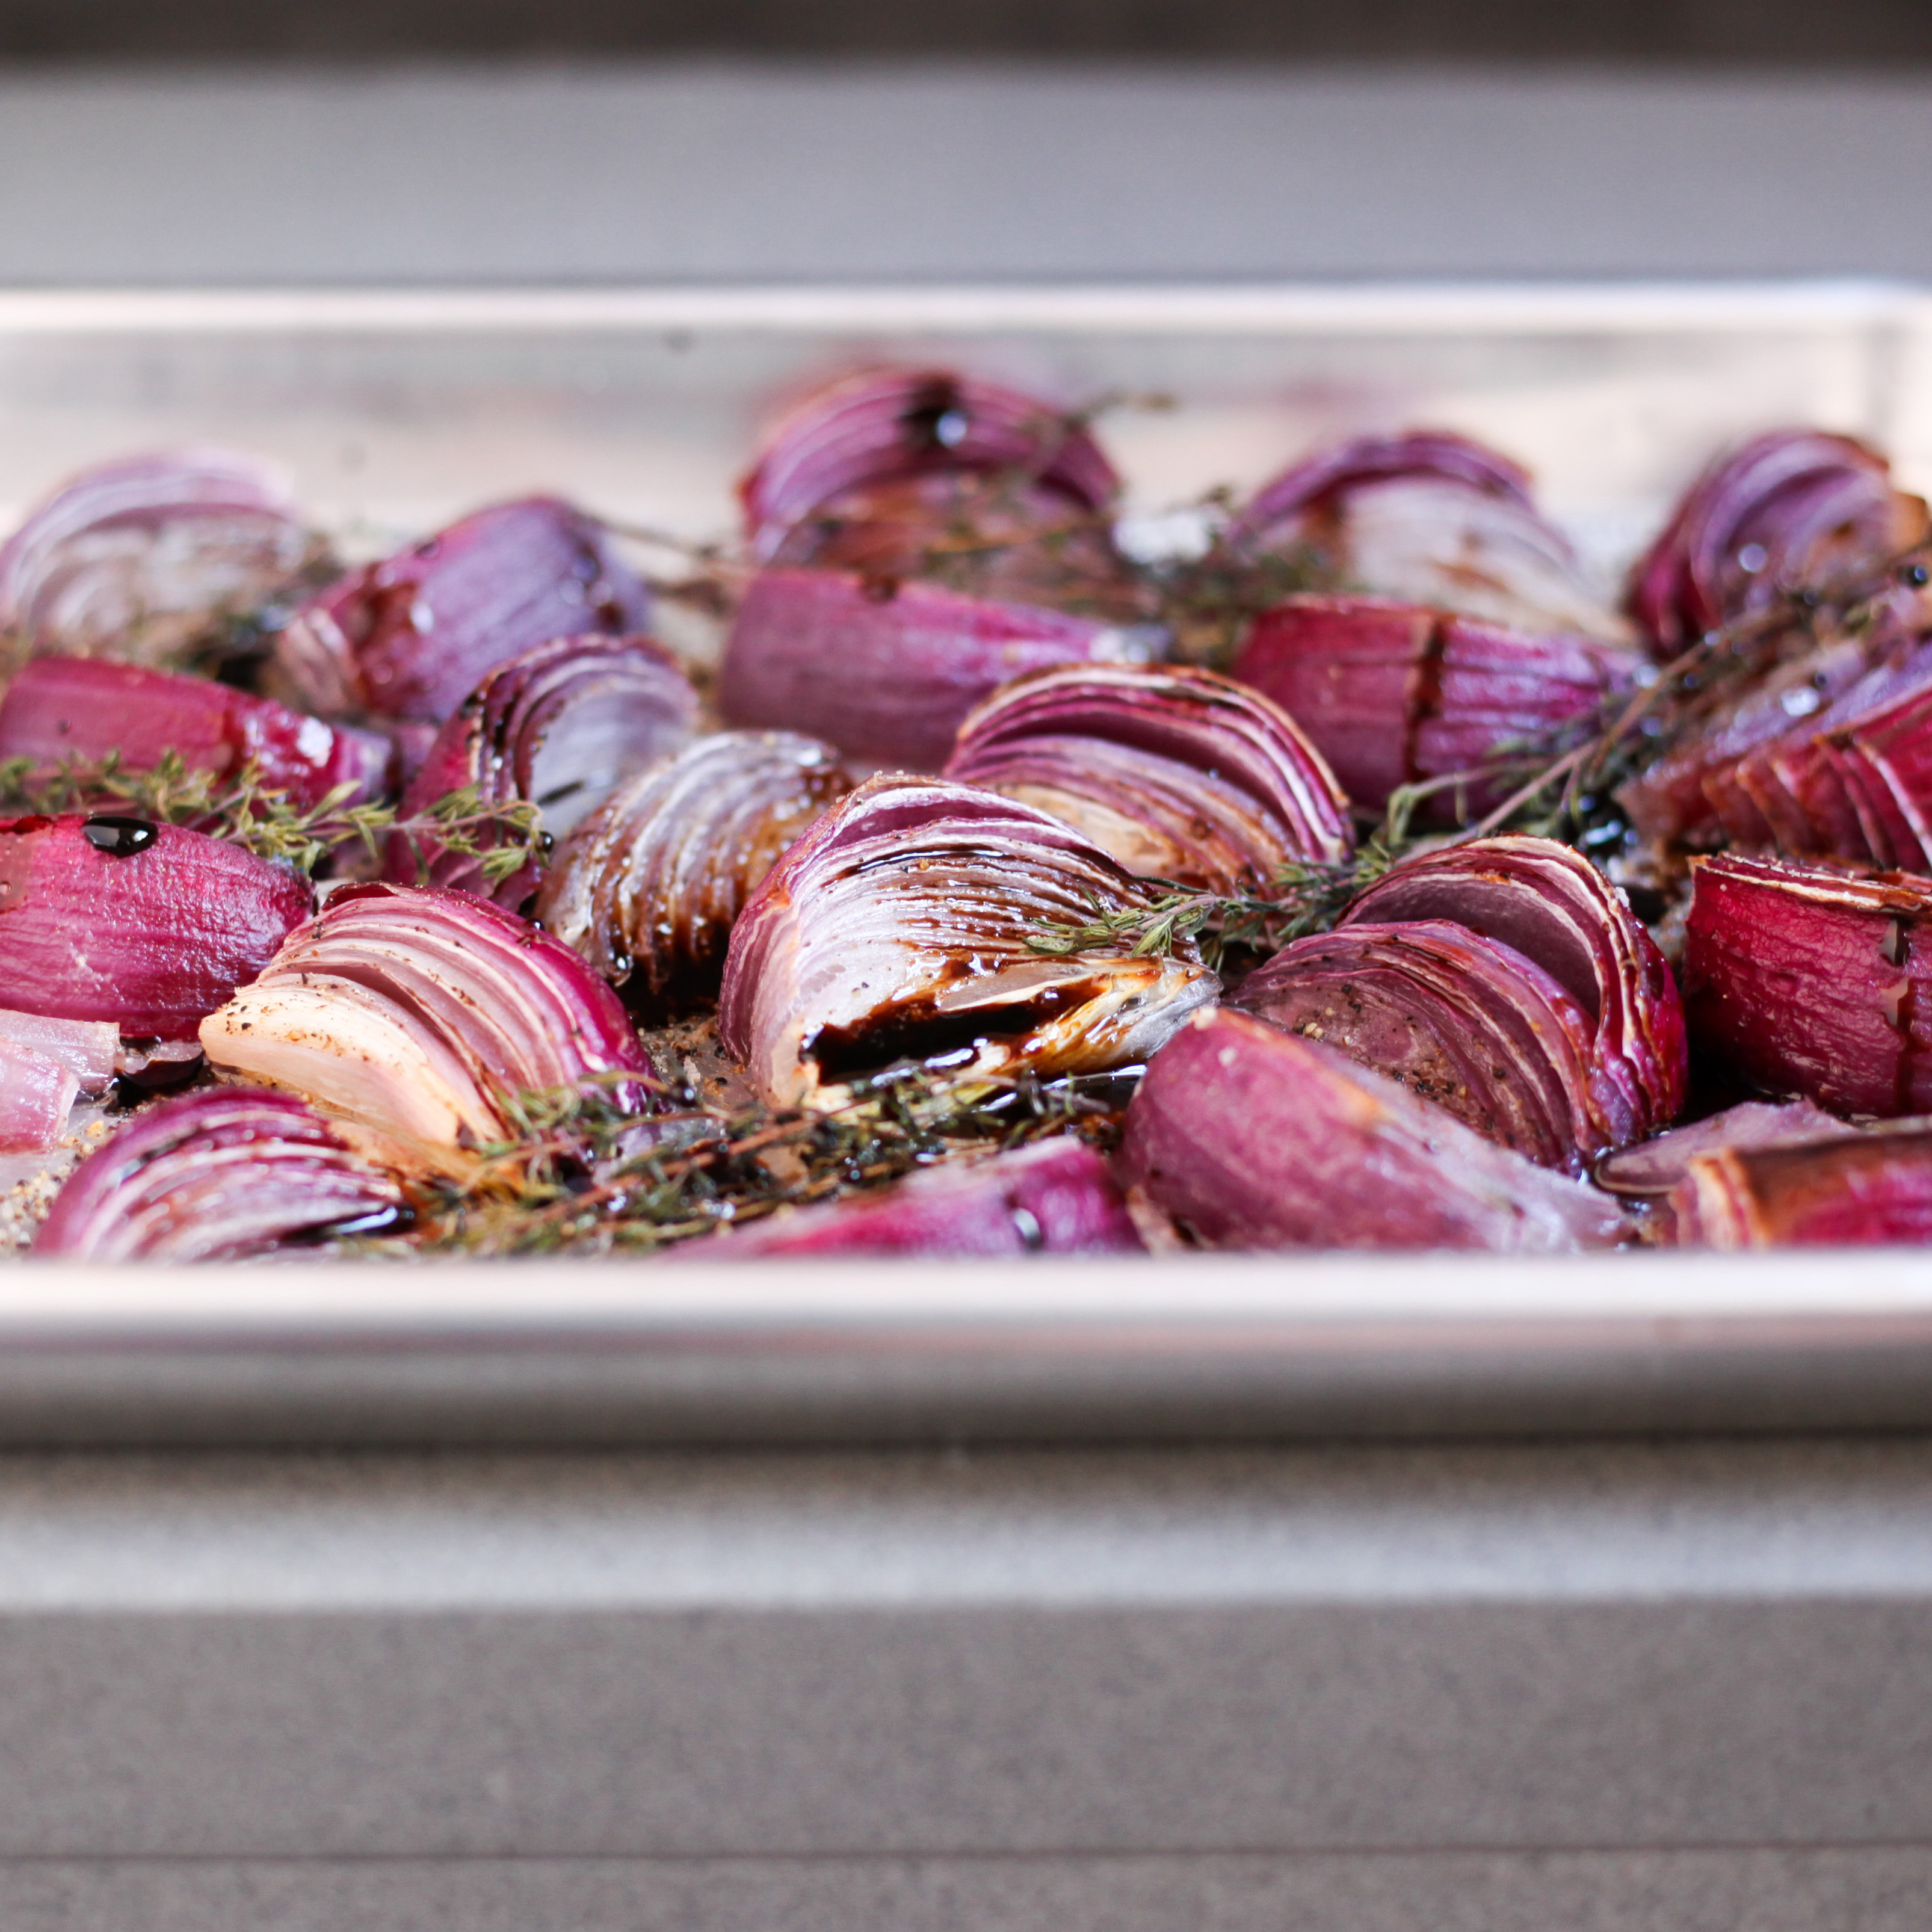 Roasted Red Onions With Thyme and Balsamic | amodestfeast.com | @amodestfeast